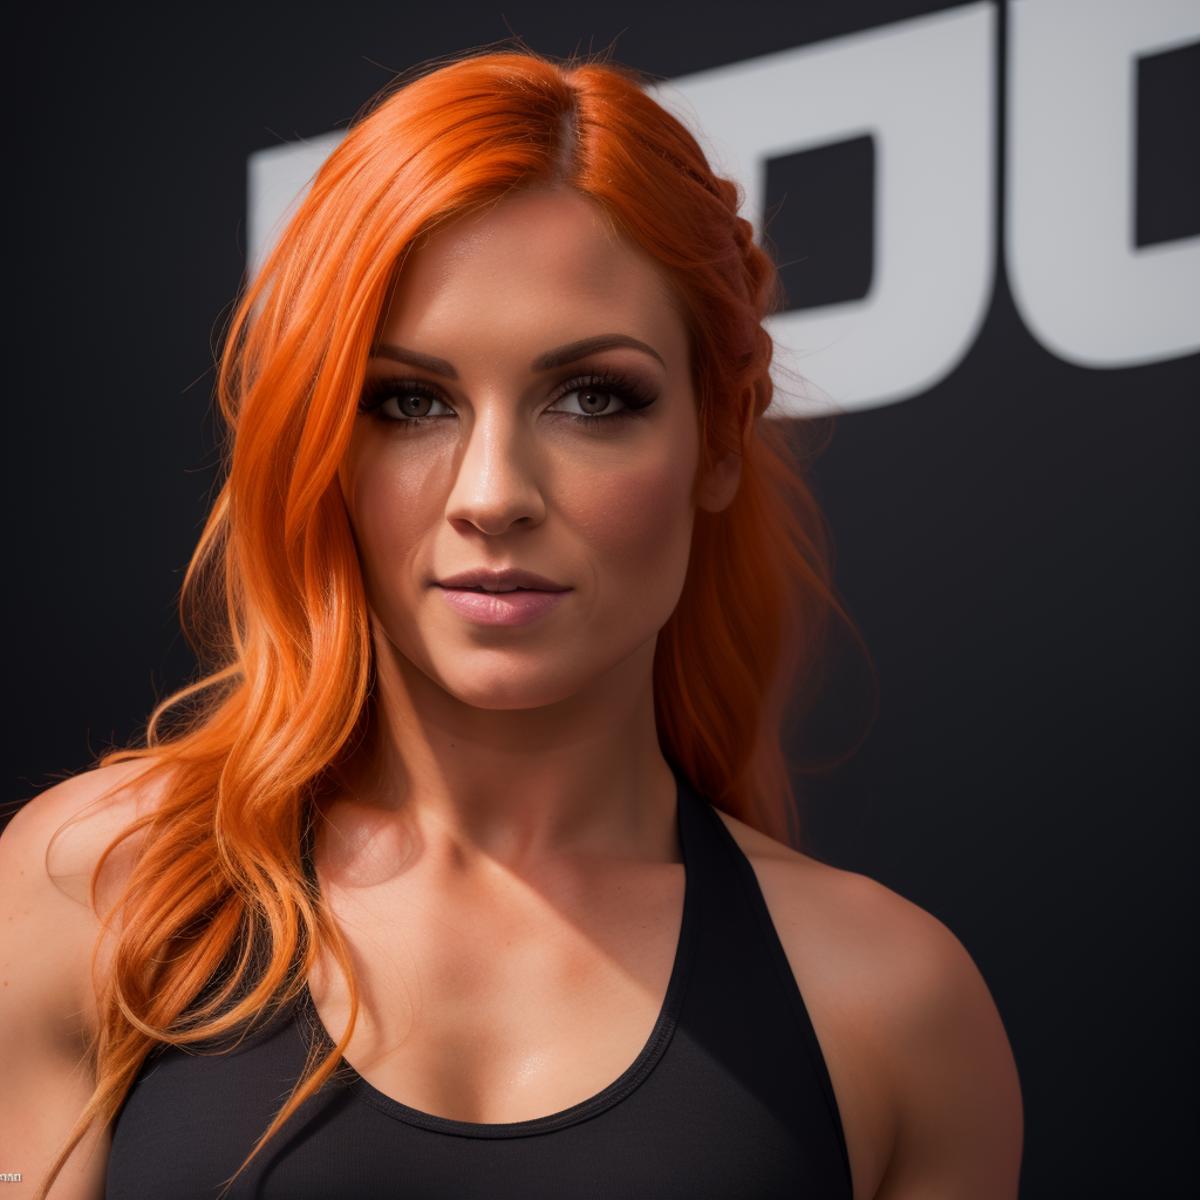 Becky Lynch image by infamous__fish